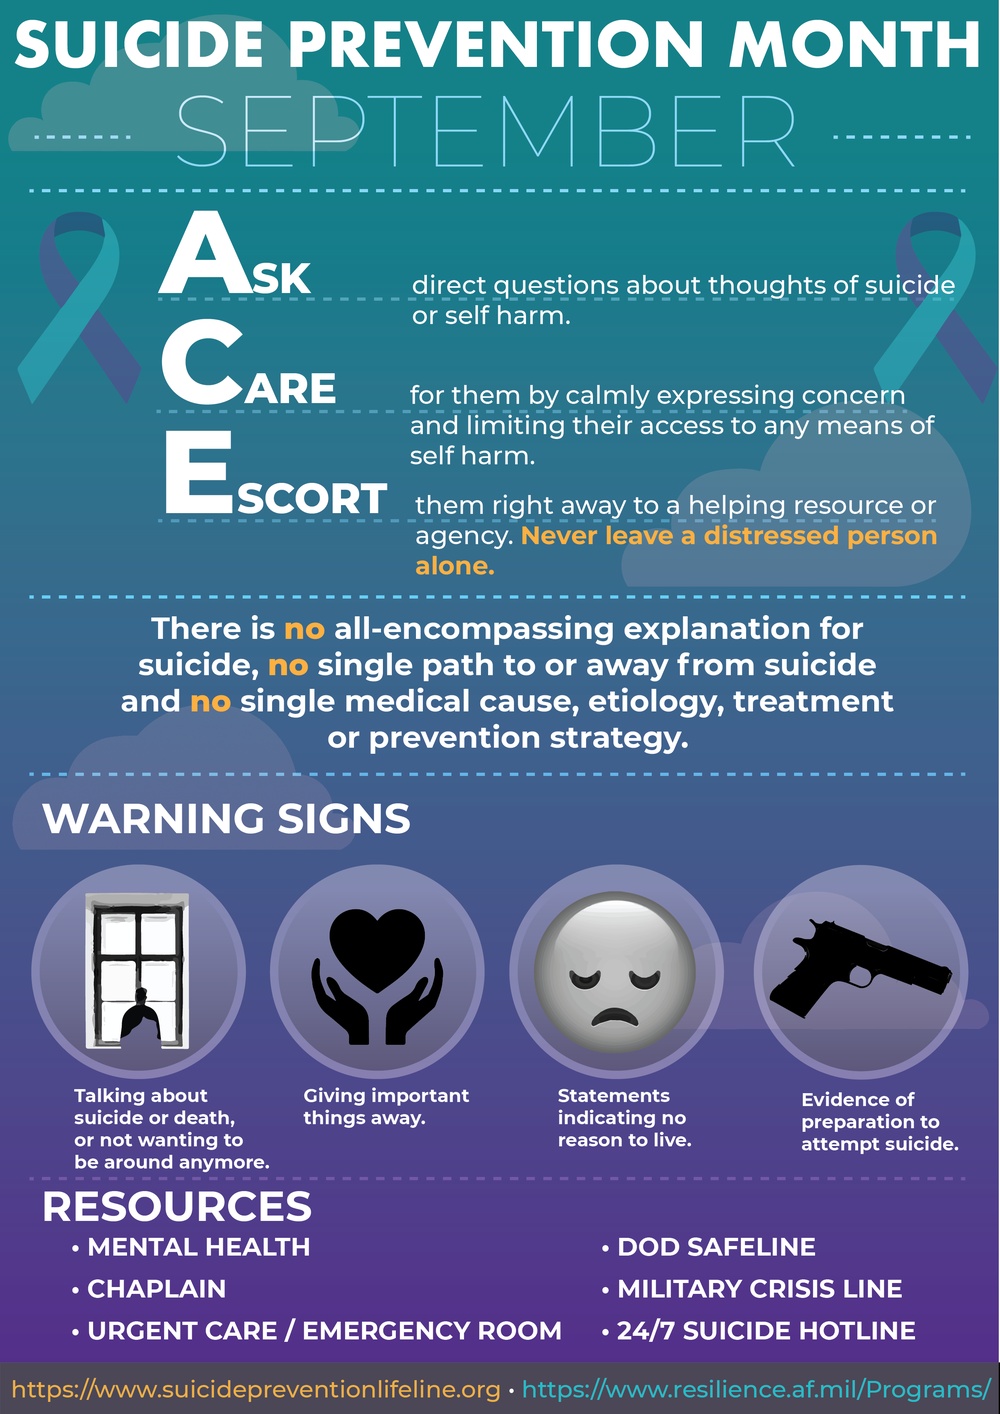 Suicide Prevention and Awareness Infographic September 2021